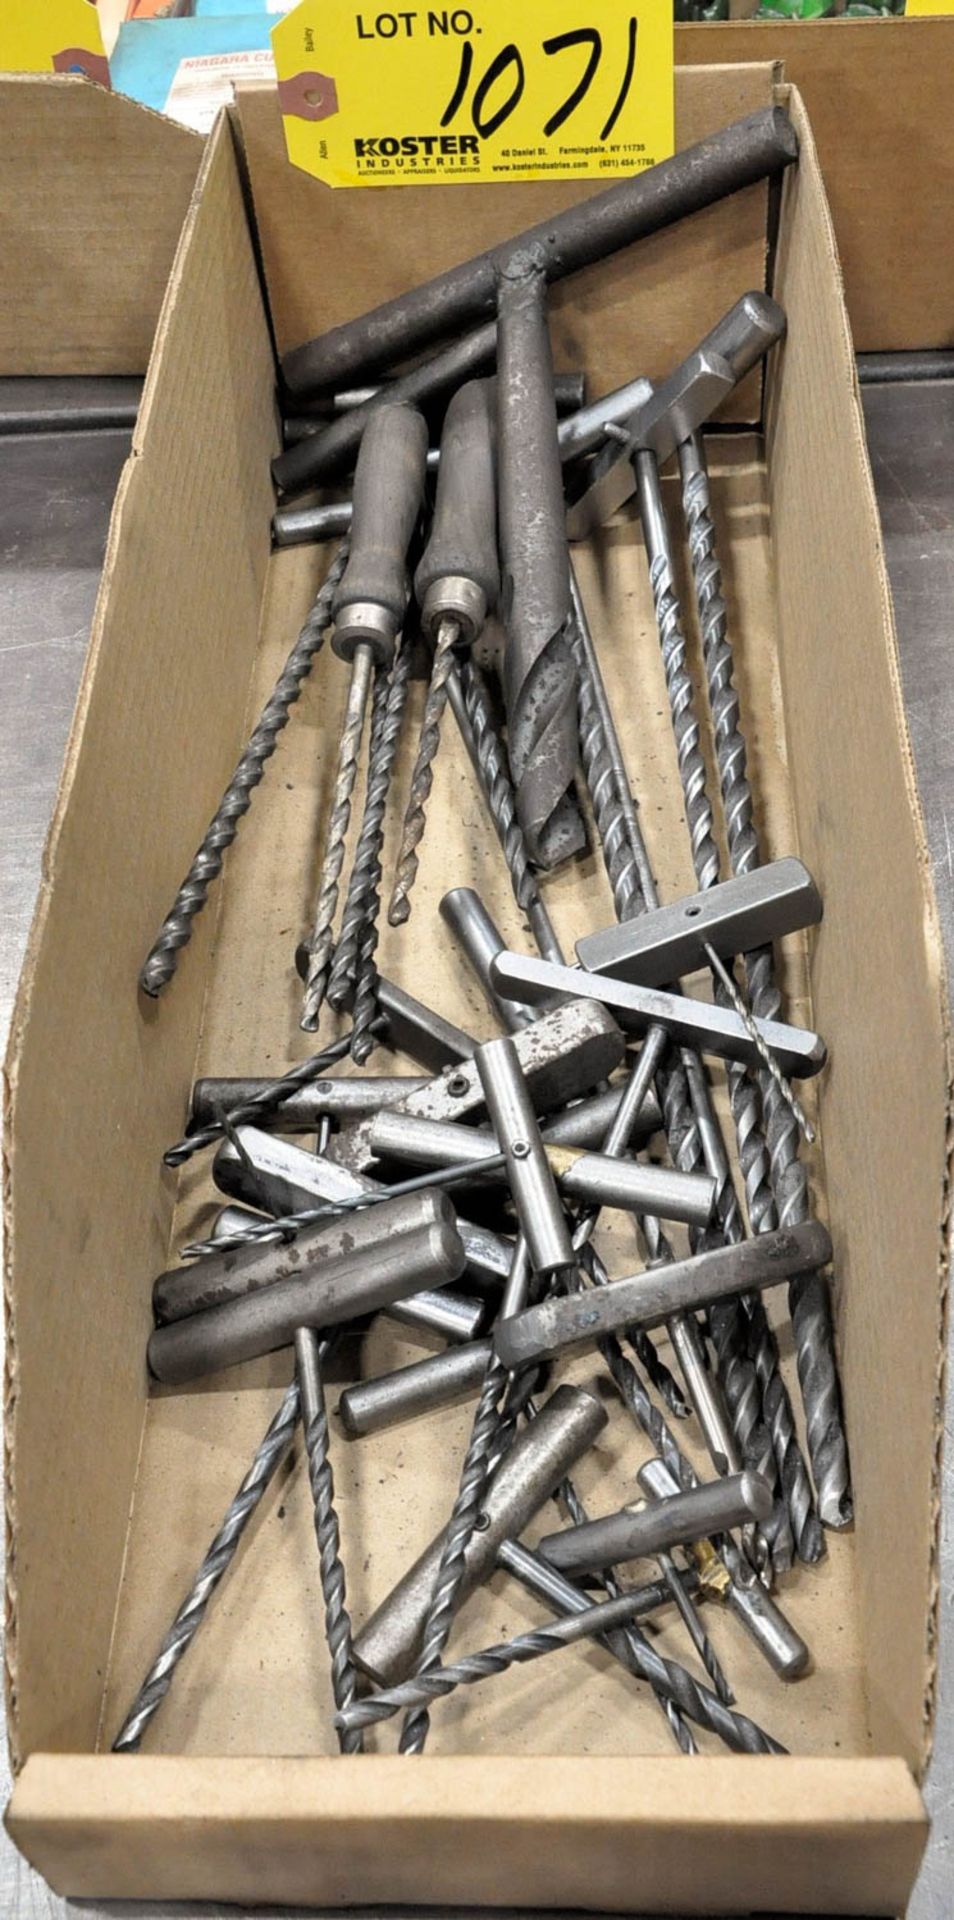 HAND DRILLS IN (1) BOX, (TOOL ROOM-TIFFIN)